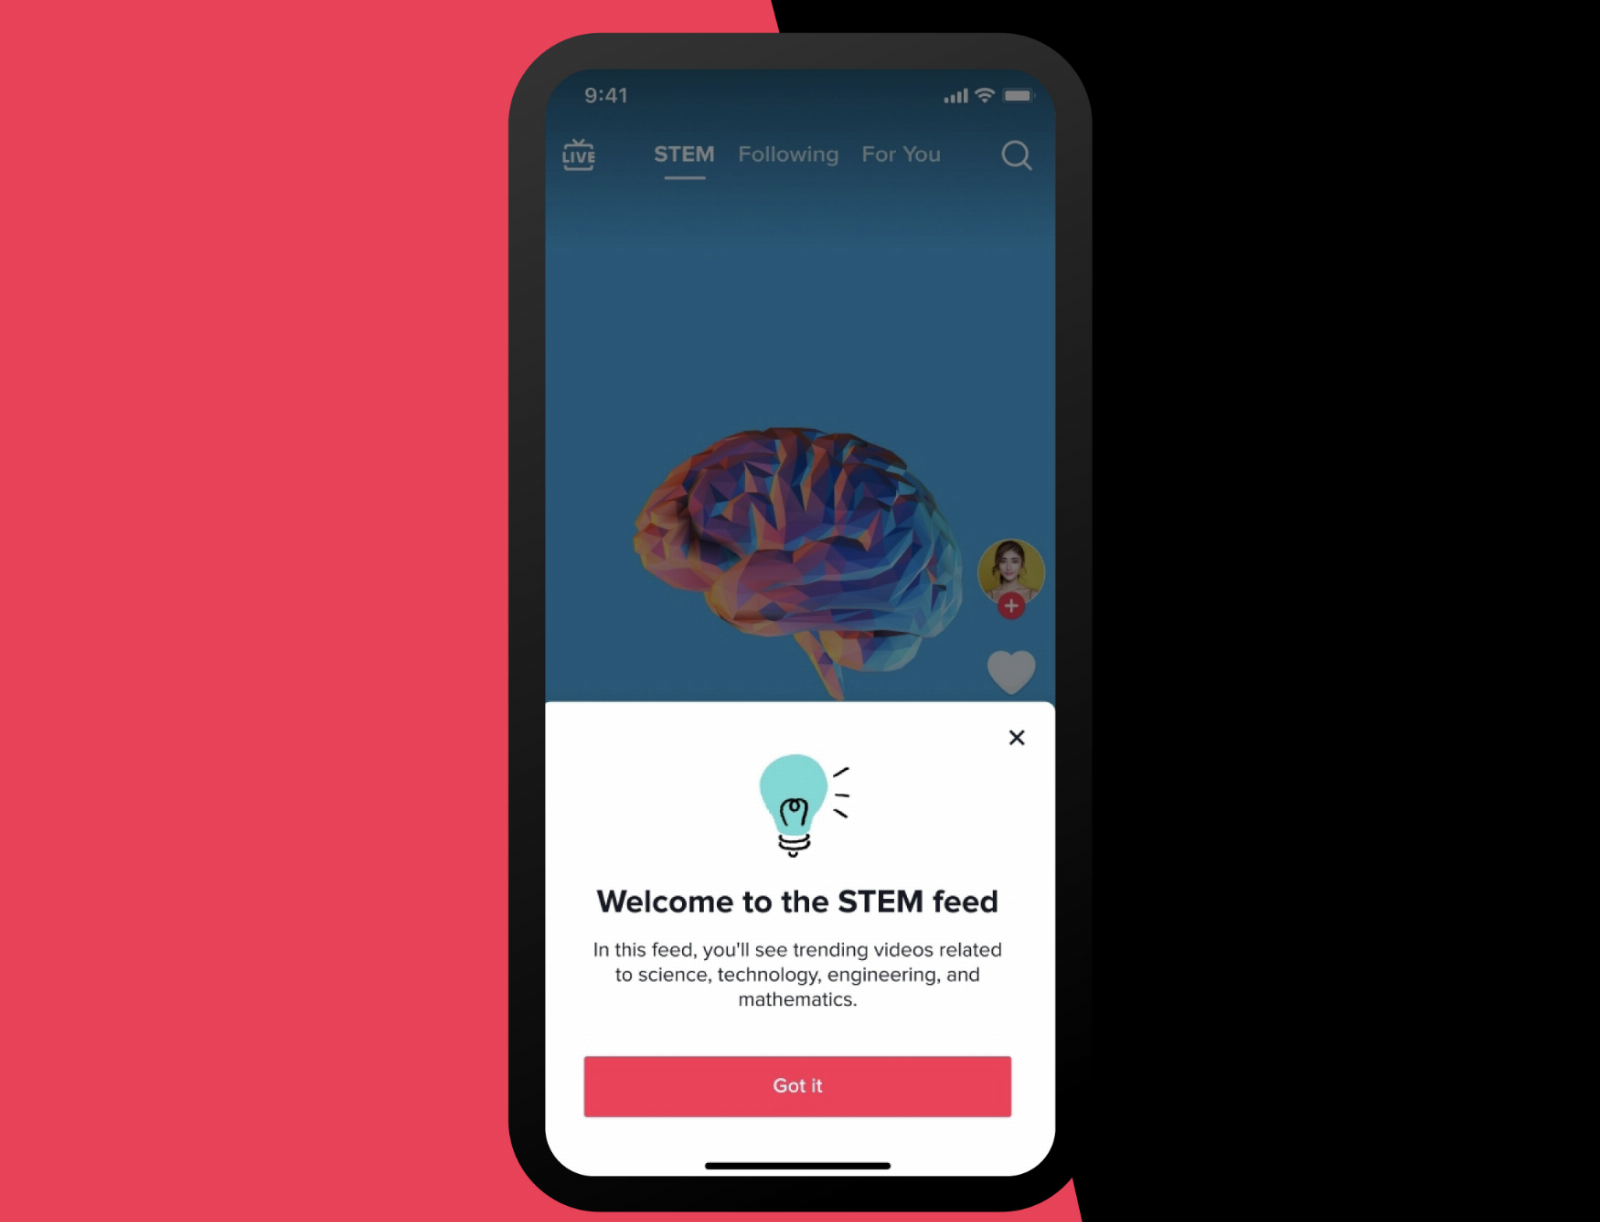 TikTok is adding a dedicated feed for STEM content